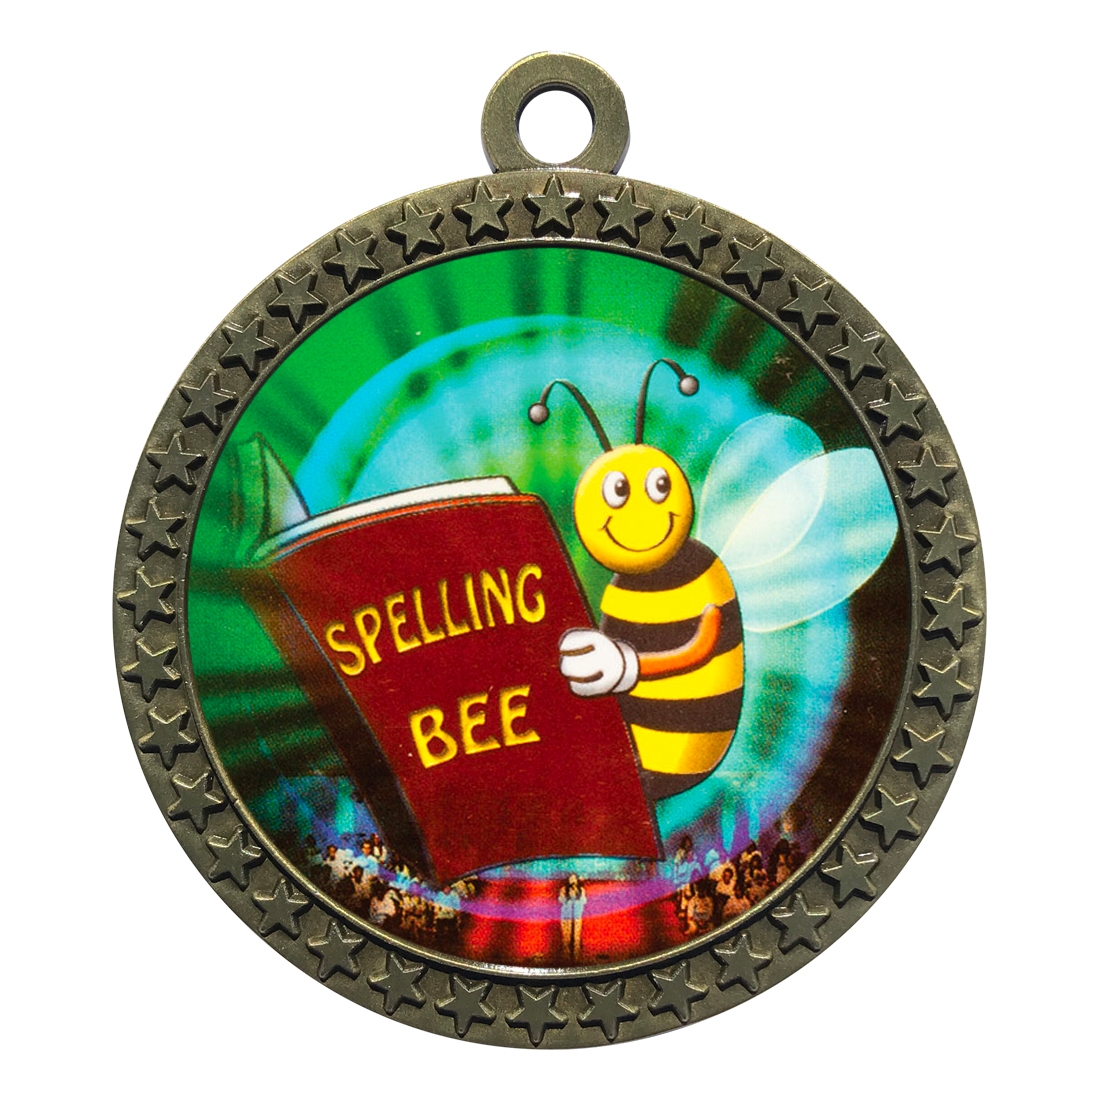 Gold Decade Awards Spelling Bee Honeycomb Medal Customize Now Spelling B Medallion with Honeycomb Neckband Silver or Bronze 3.25 Inch Wide